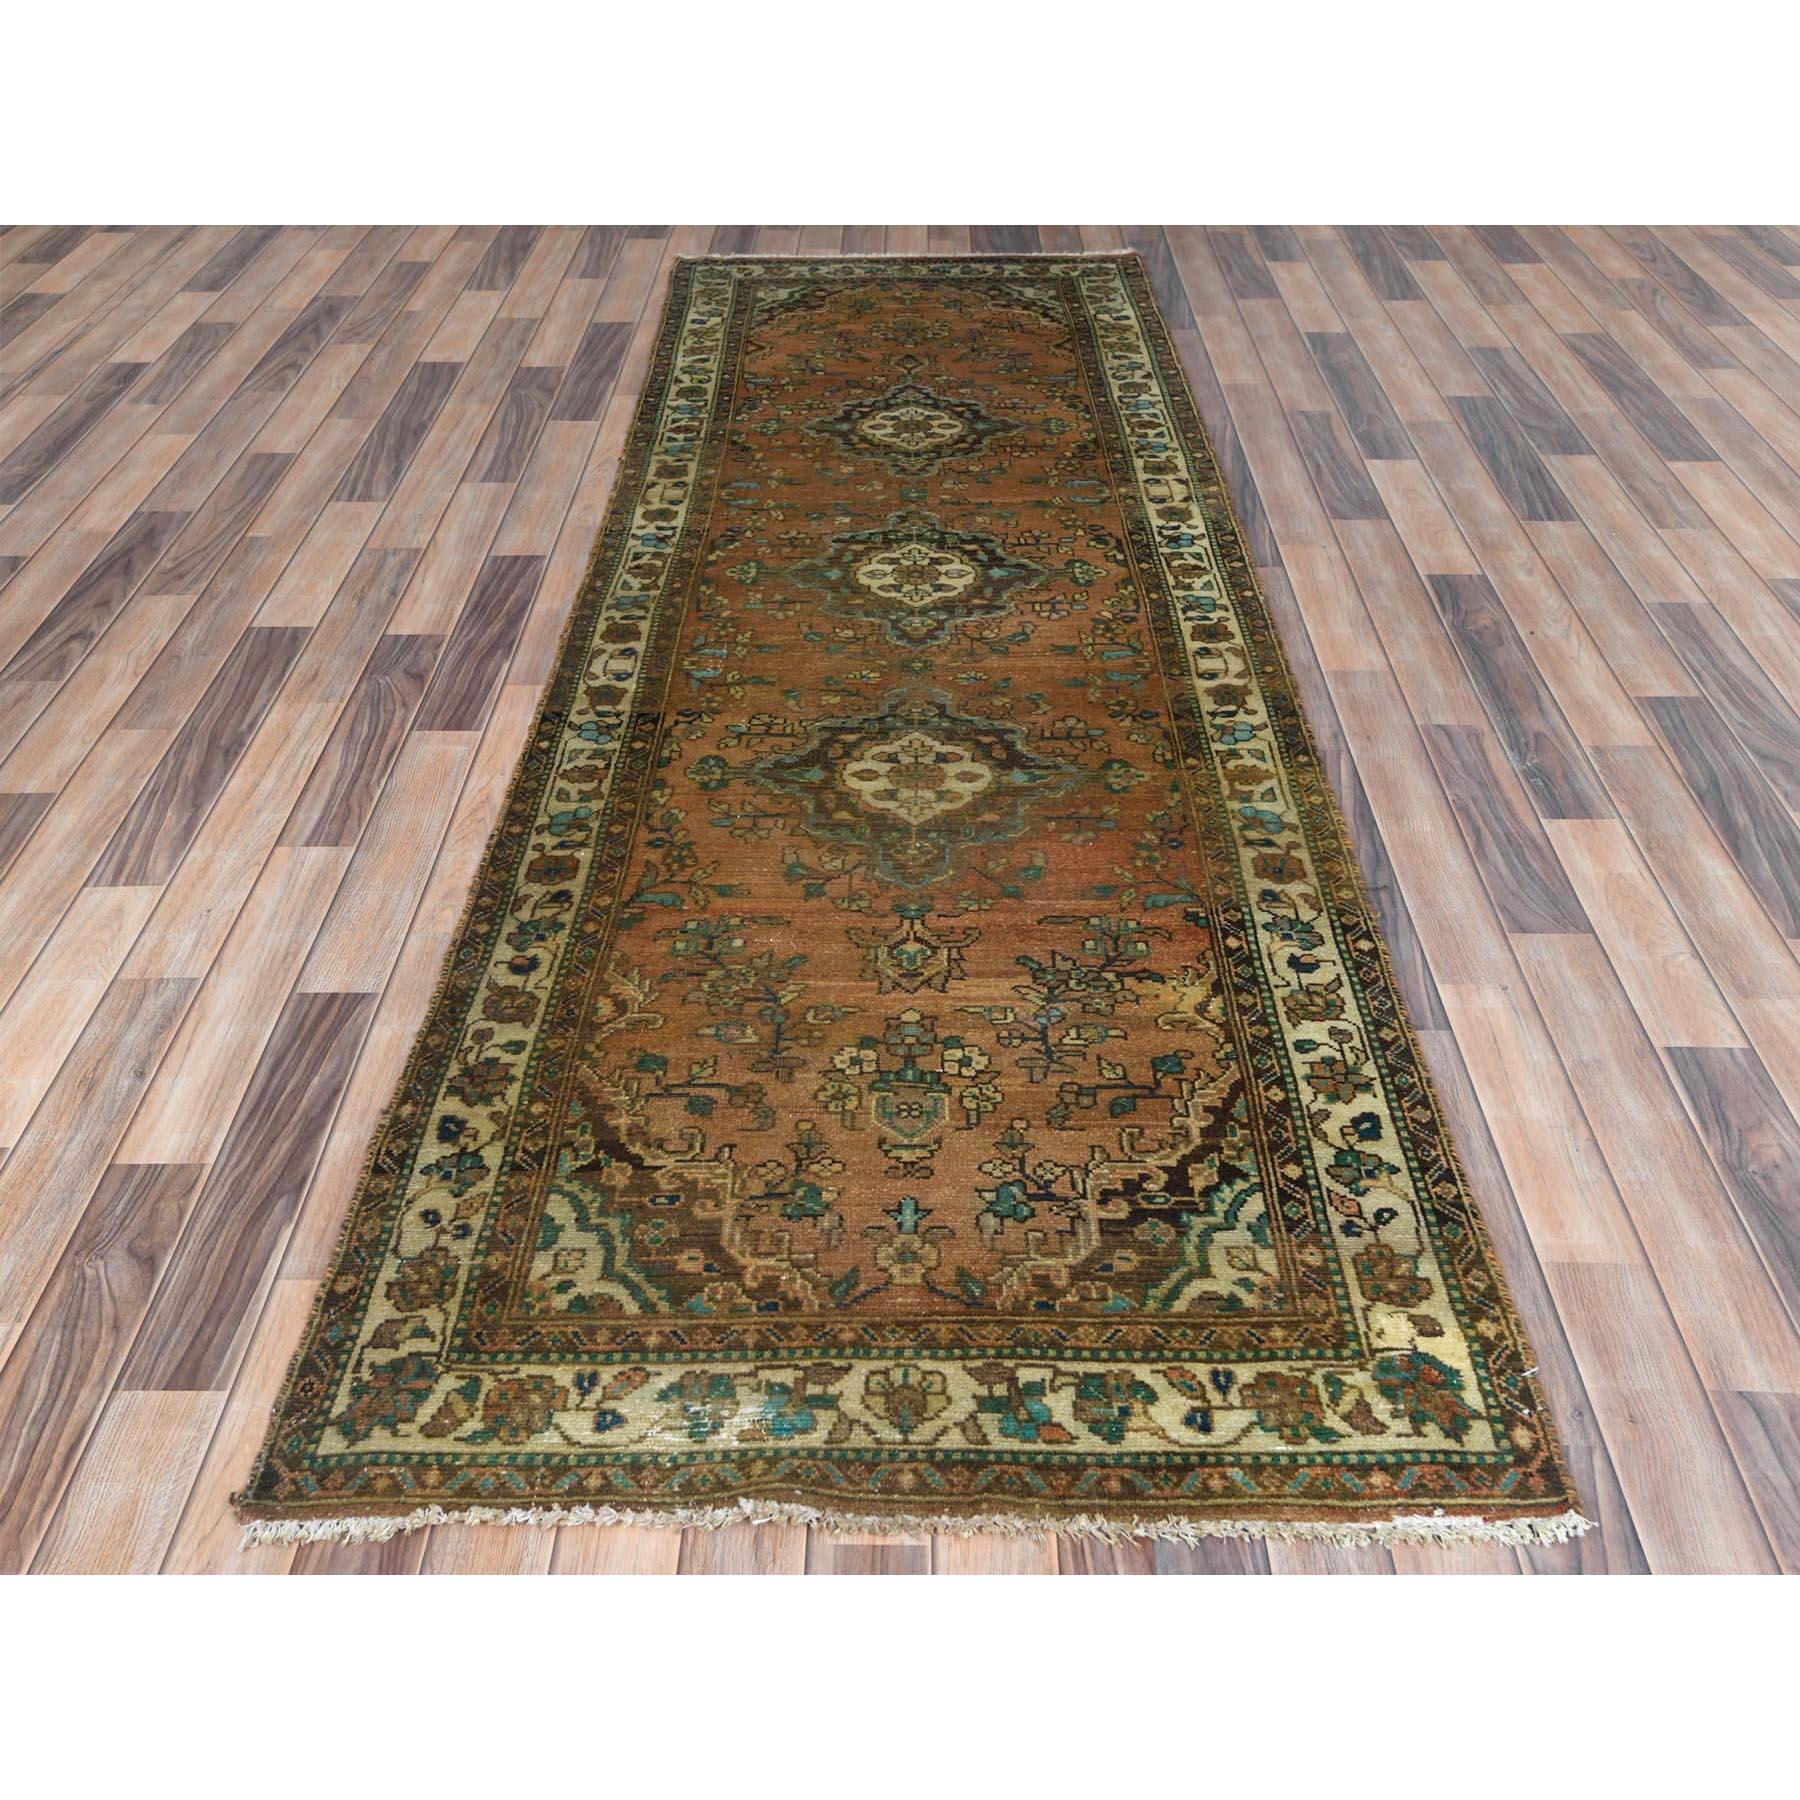 This fabulous Hand-Knotted carpet has been created and designed for extra strength and durability. This rug has been handcrafted for weeks in the traditional method that is used to make
Exact rug size in feet and inches : 3'3